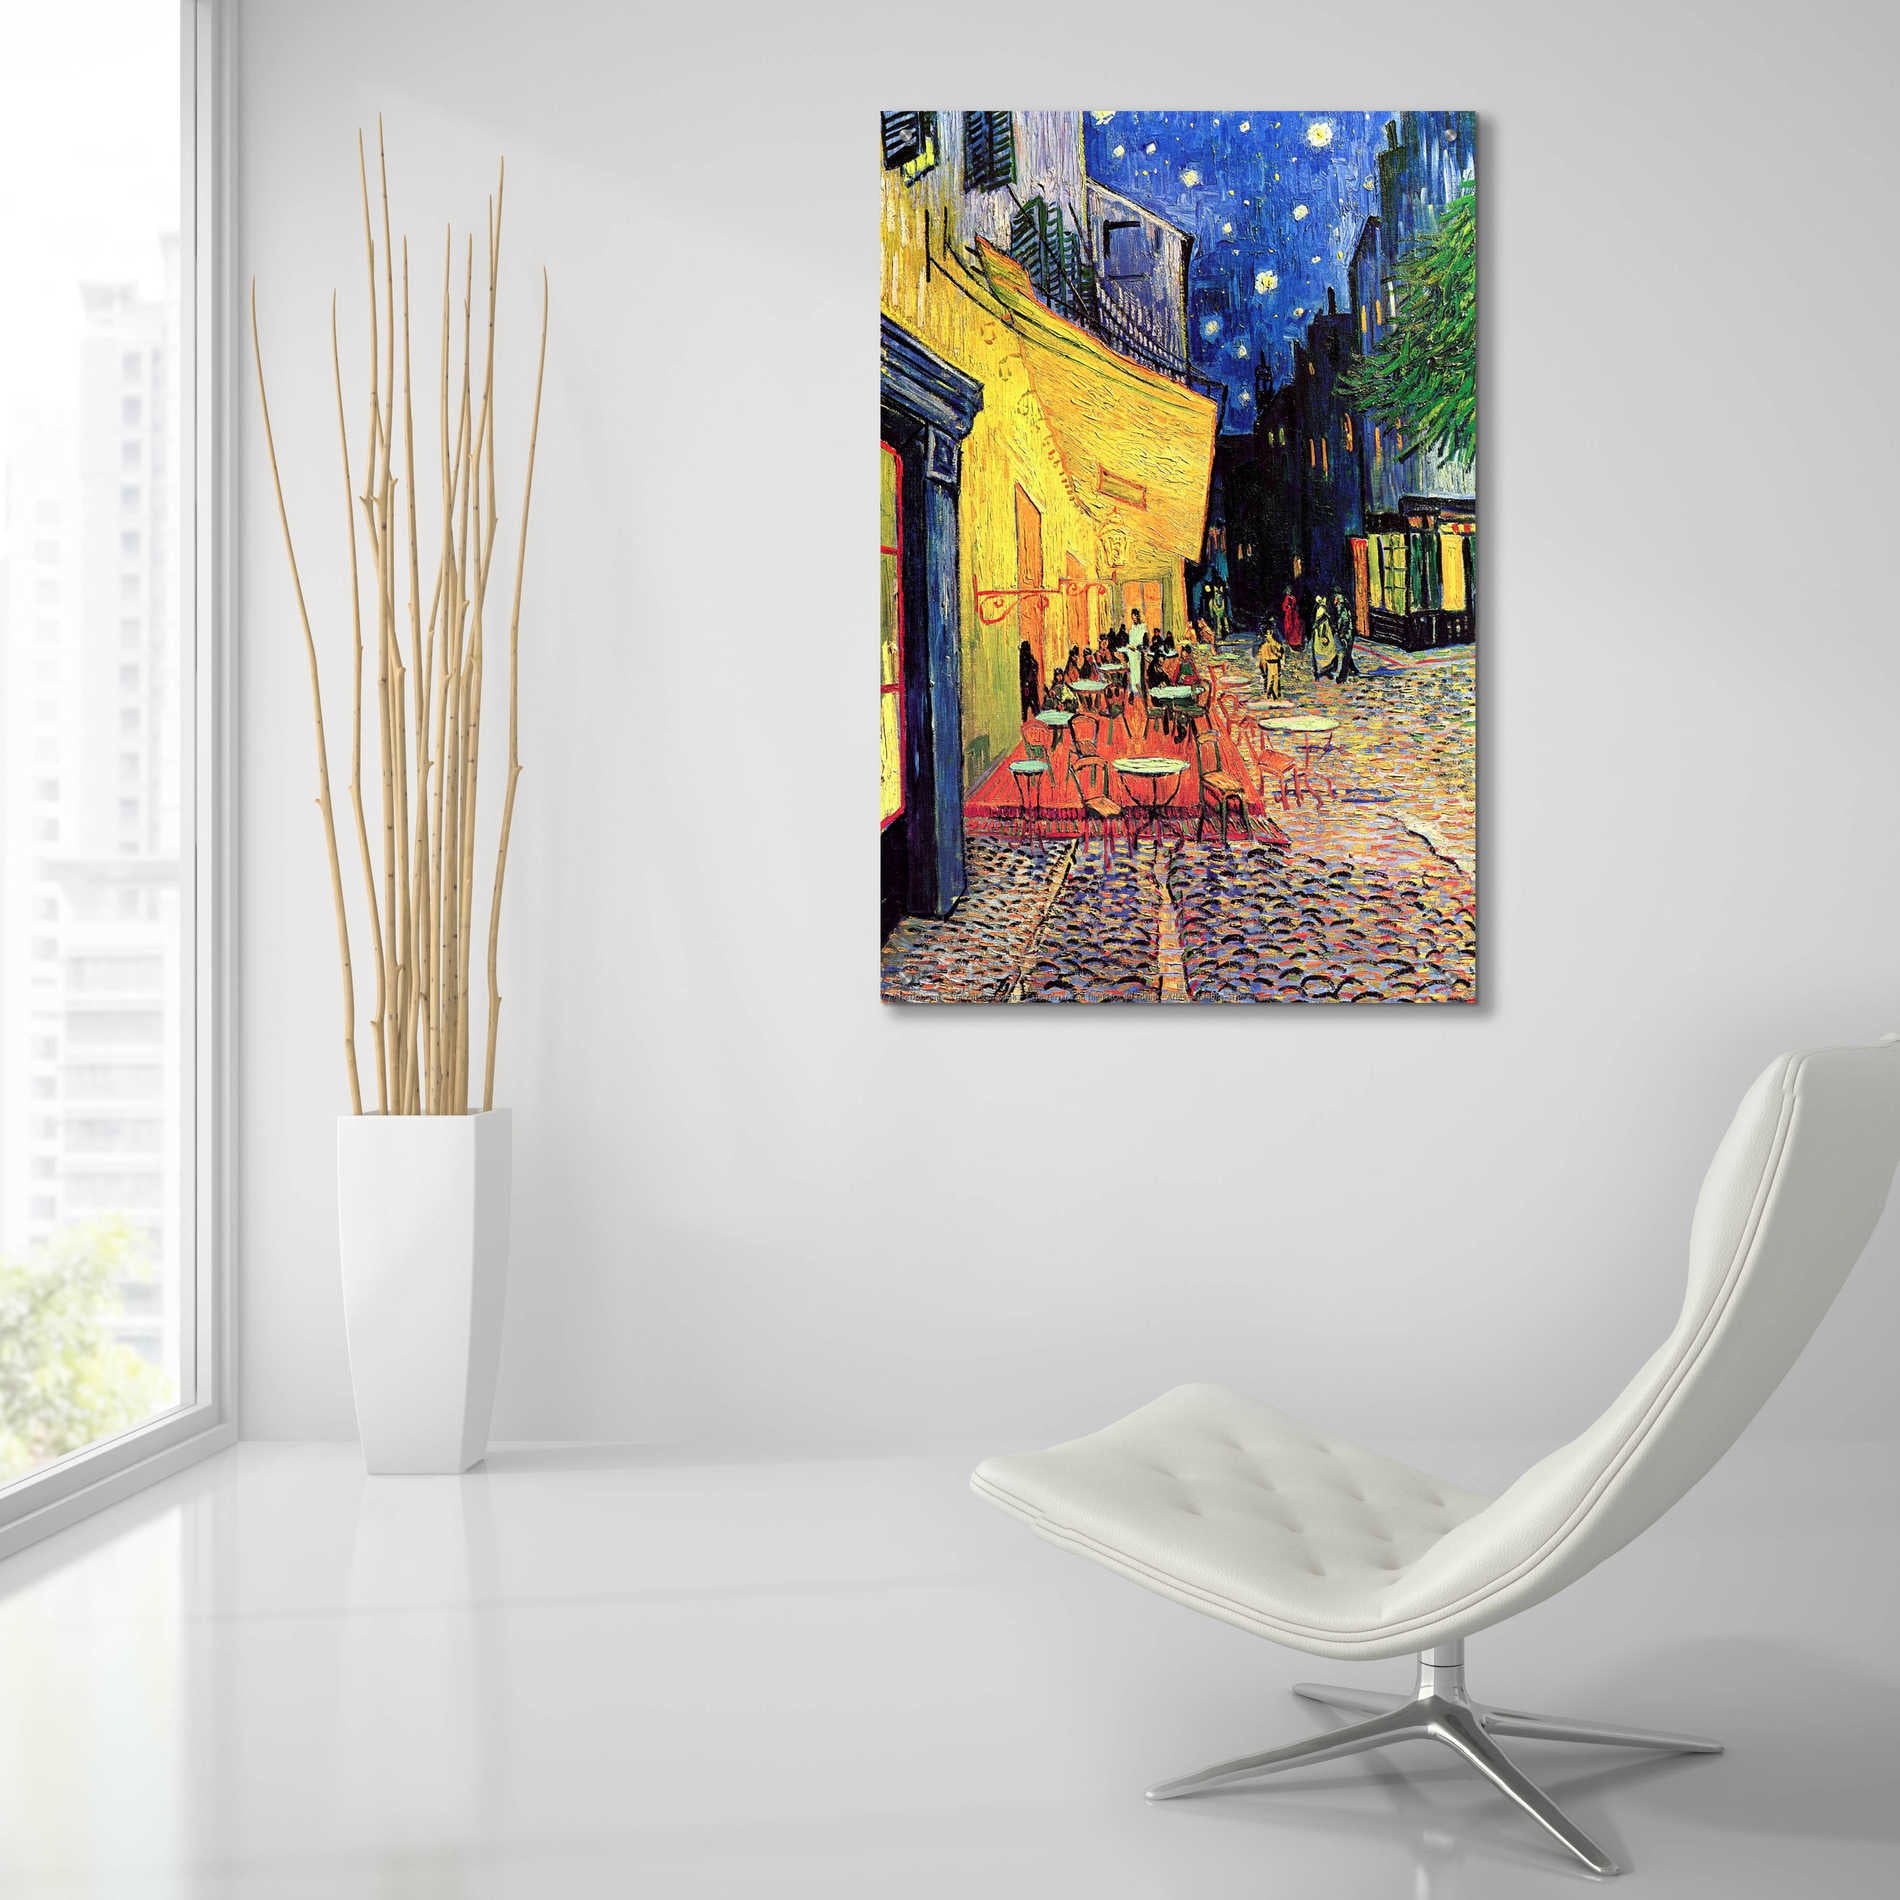 Epic Art 'Cafe Terrace at Night' by Vincent van Gogh, Acrylic Glass Wall Art,24x36